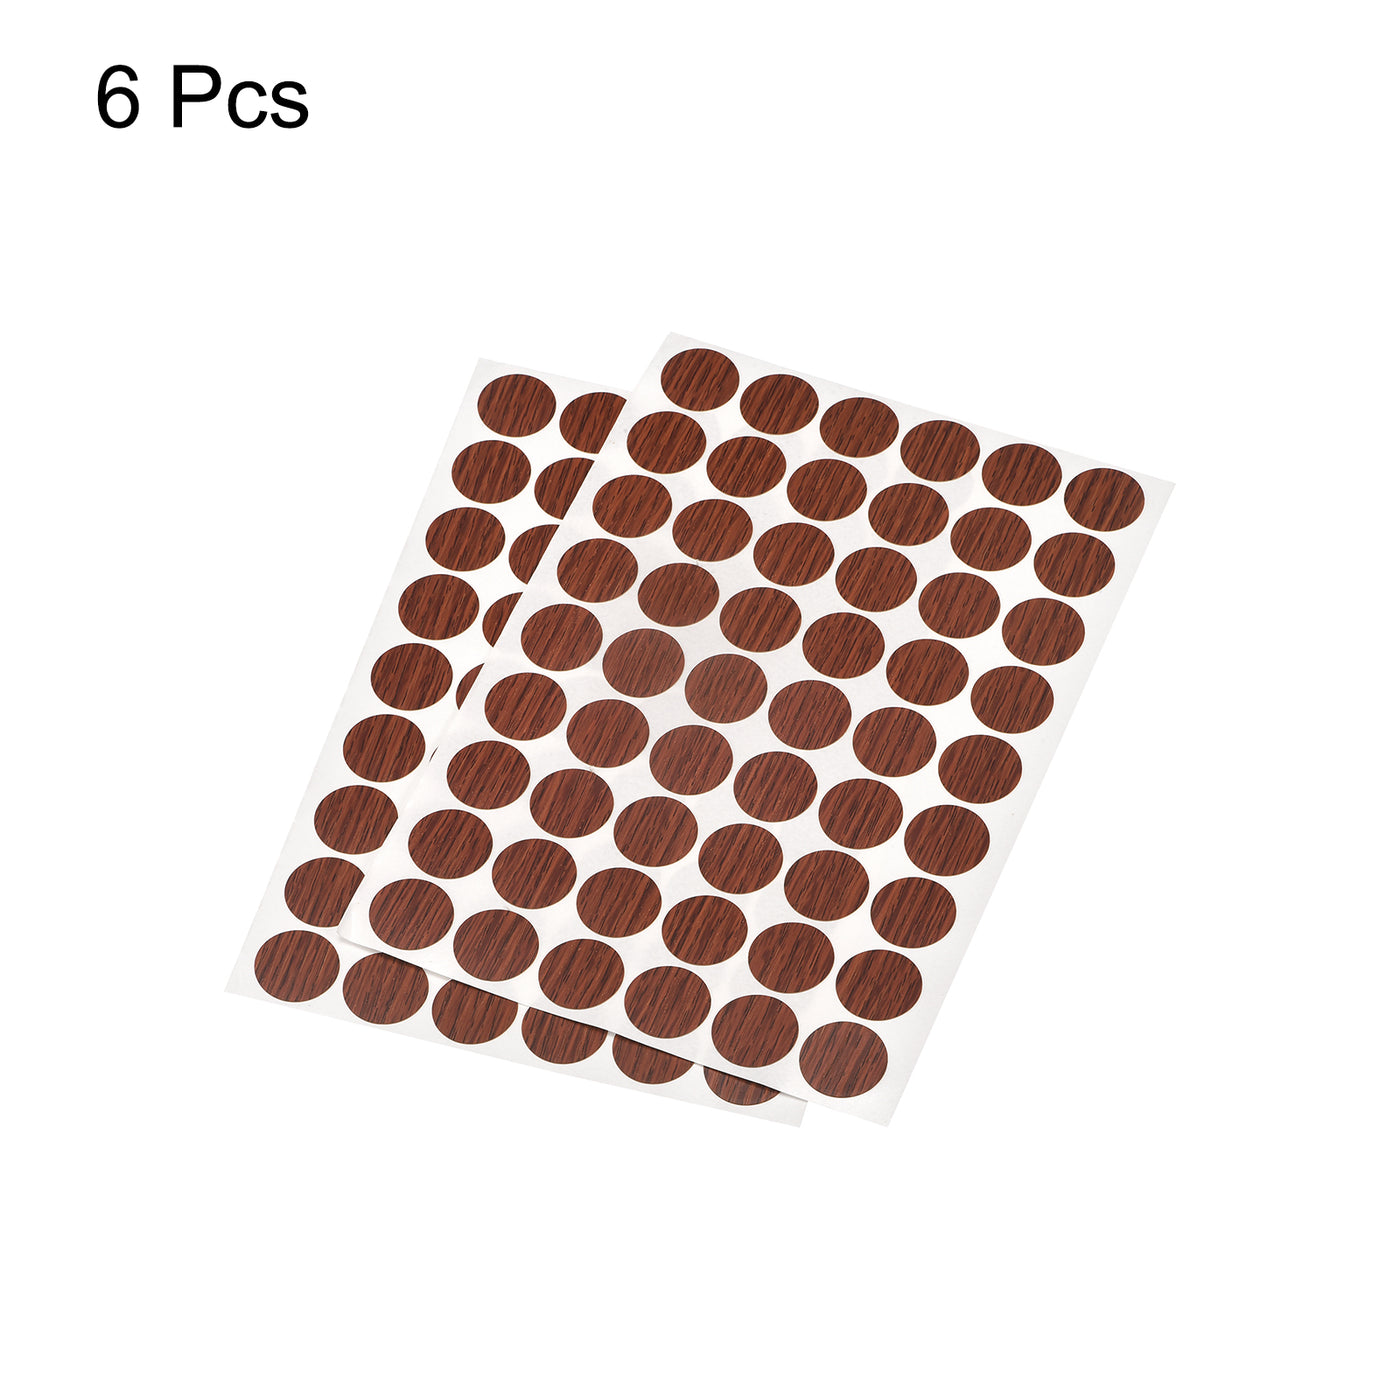 uxcell Uxcell Screw Hole Cover Stickers, 21mm Dia PVC Self Adhesive Covers Caps for Wood Furniture Cabinet Shelf Wardrobe, Walnut 6 Sheet/324pcs